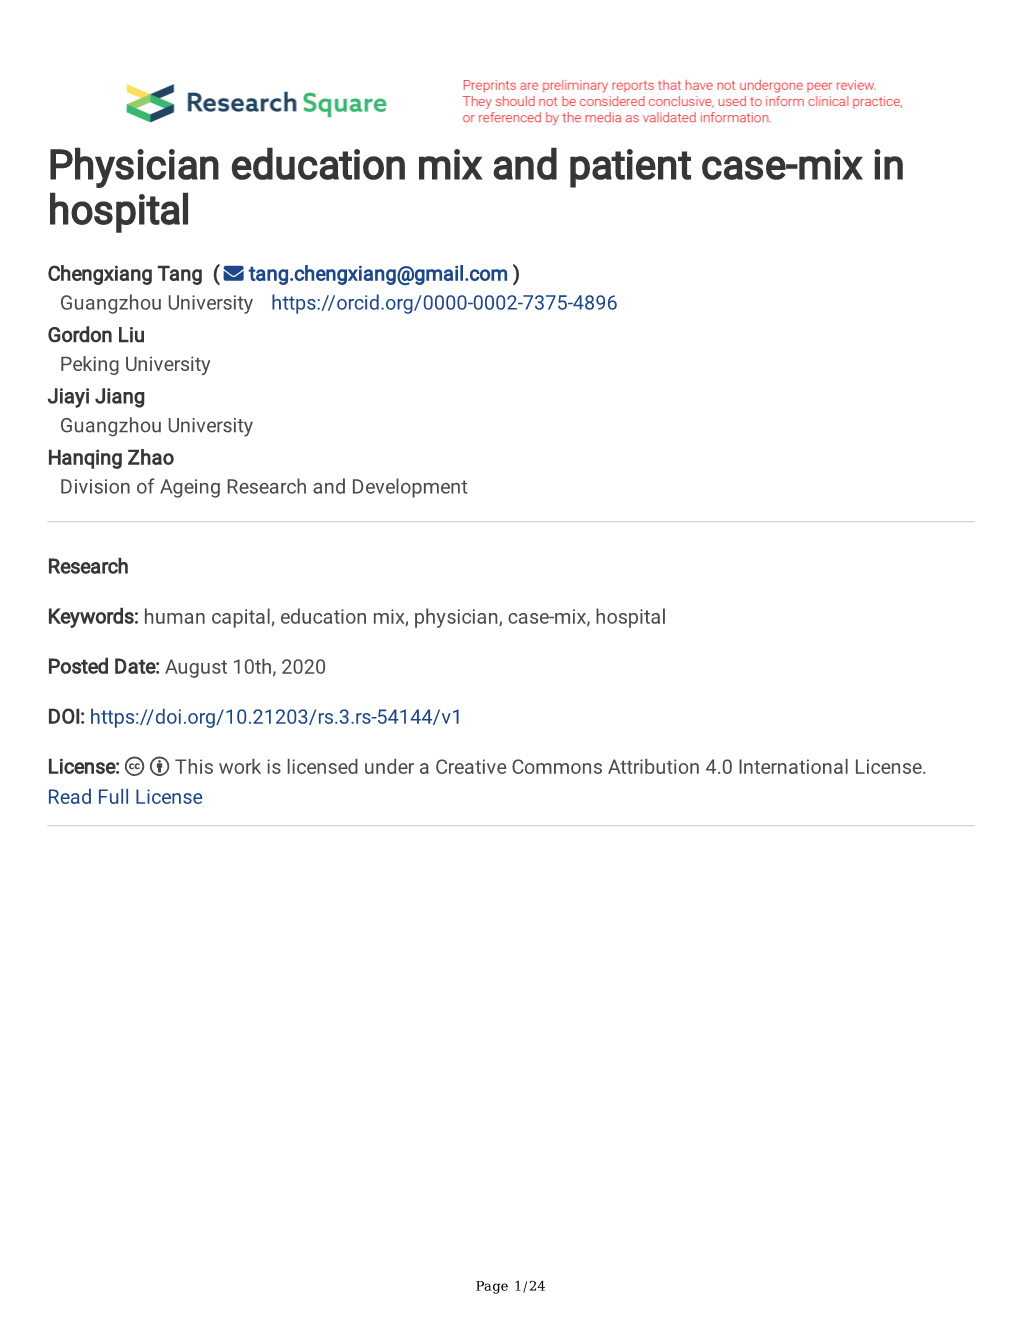 Physician Education Mix and Patient Case-Mix in Hospital